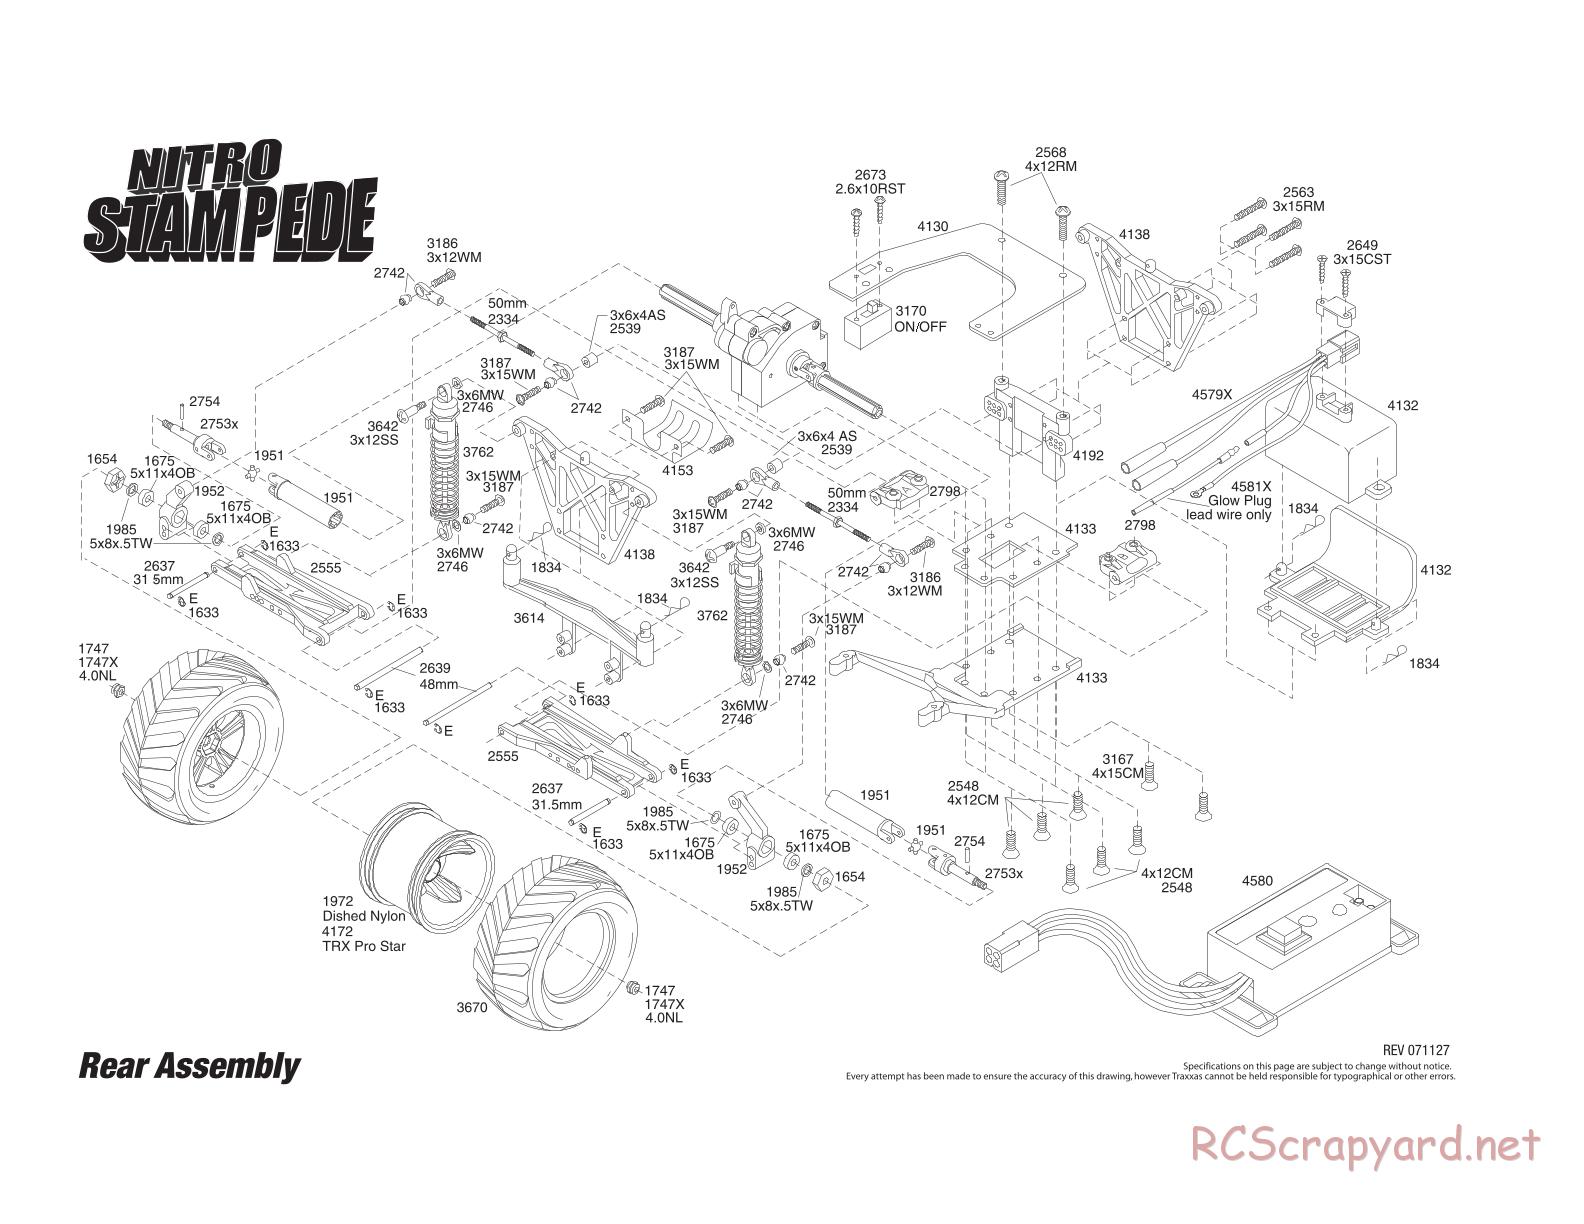 Traxxas - Nitro Stampede - Exploded Views - Page 4